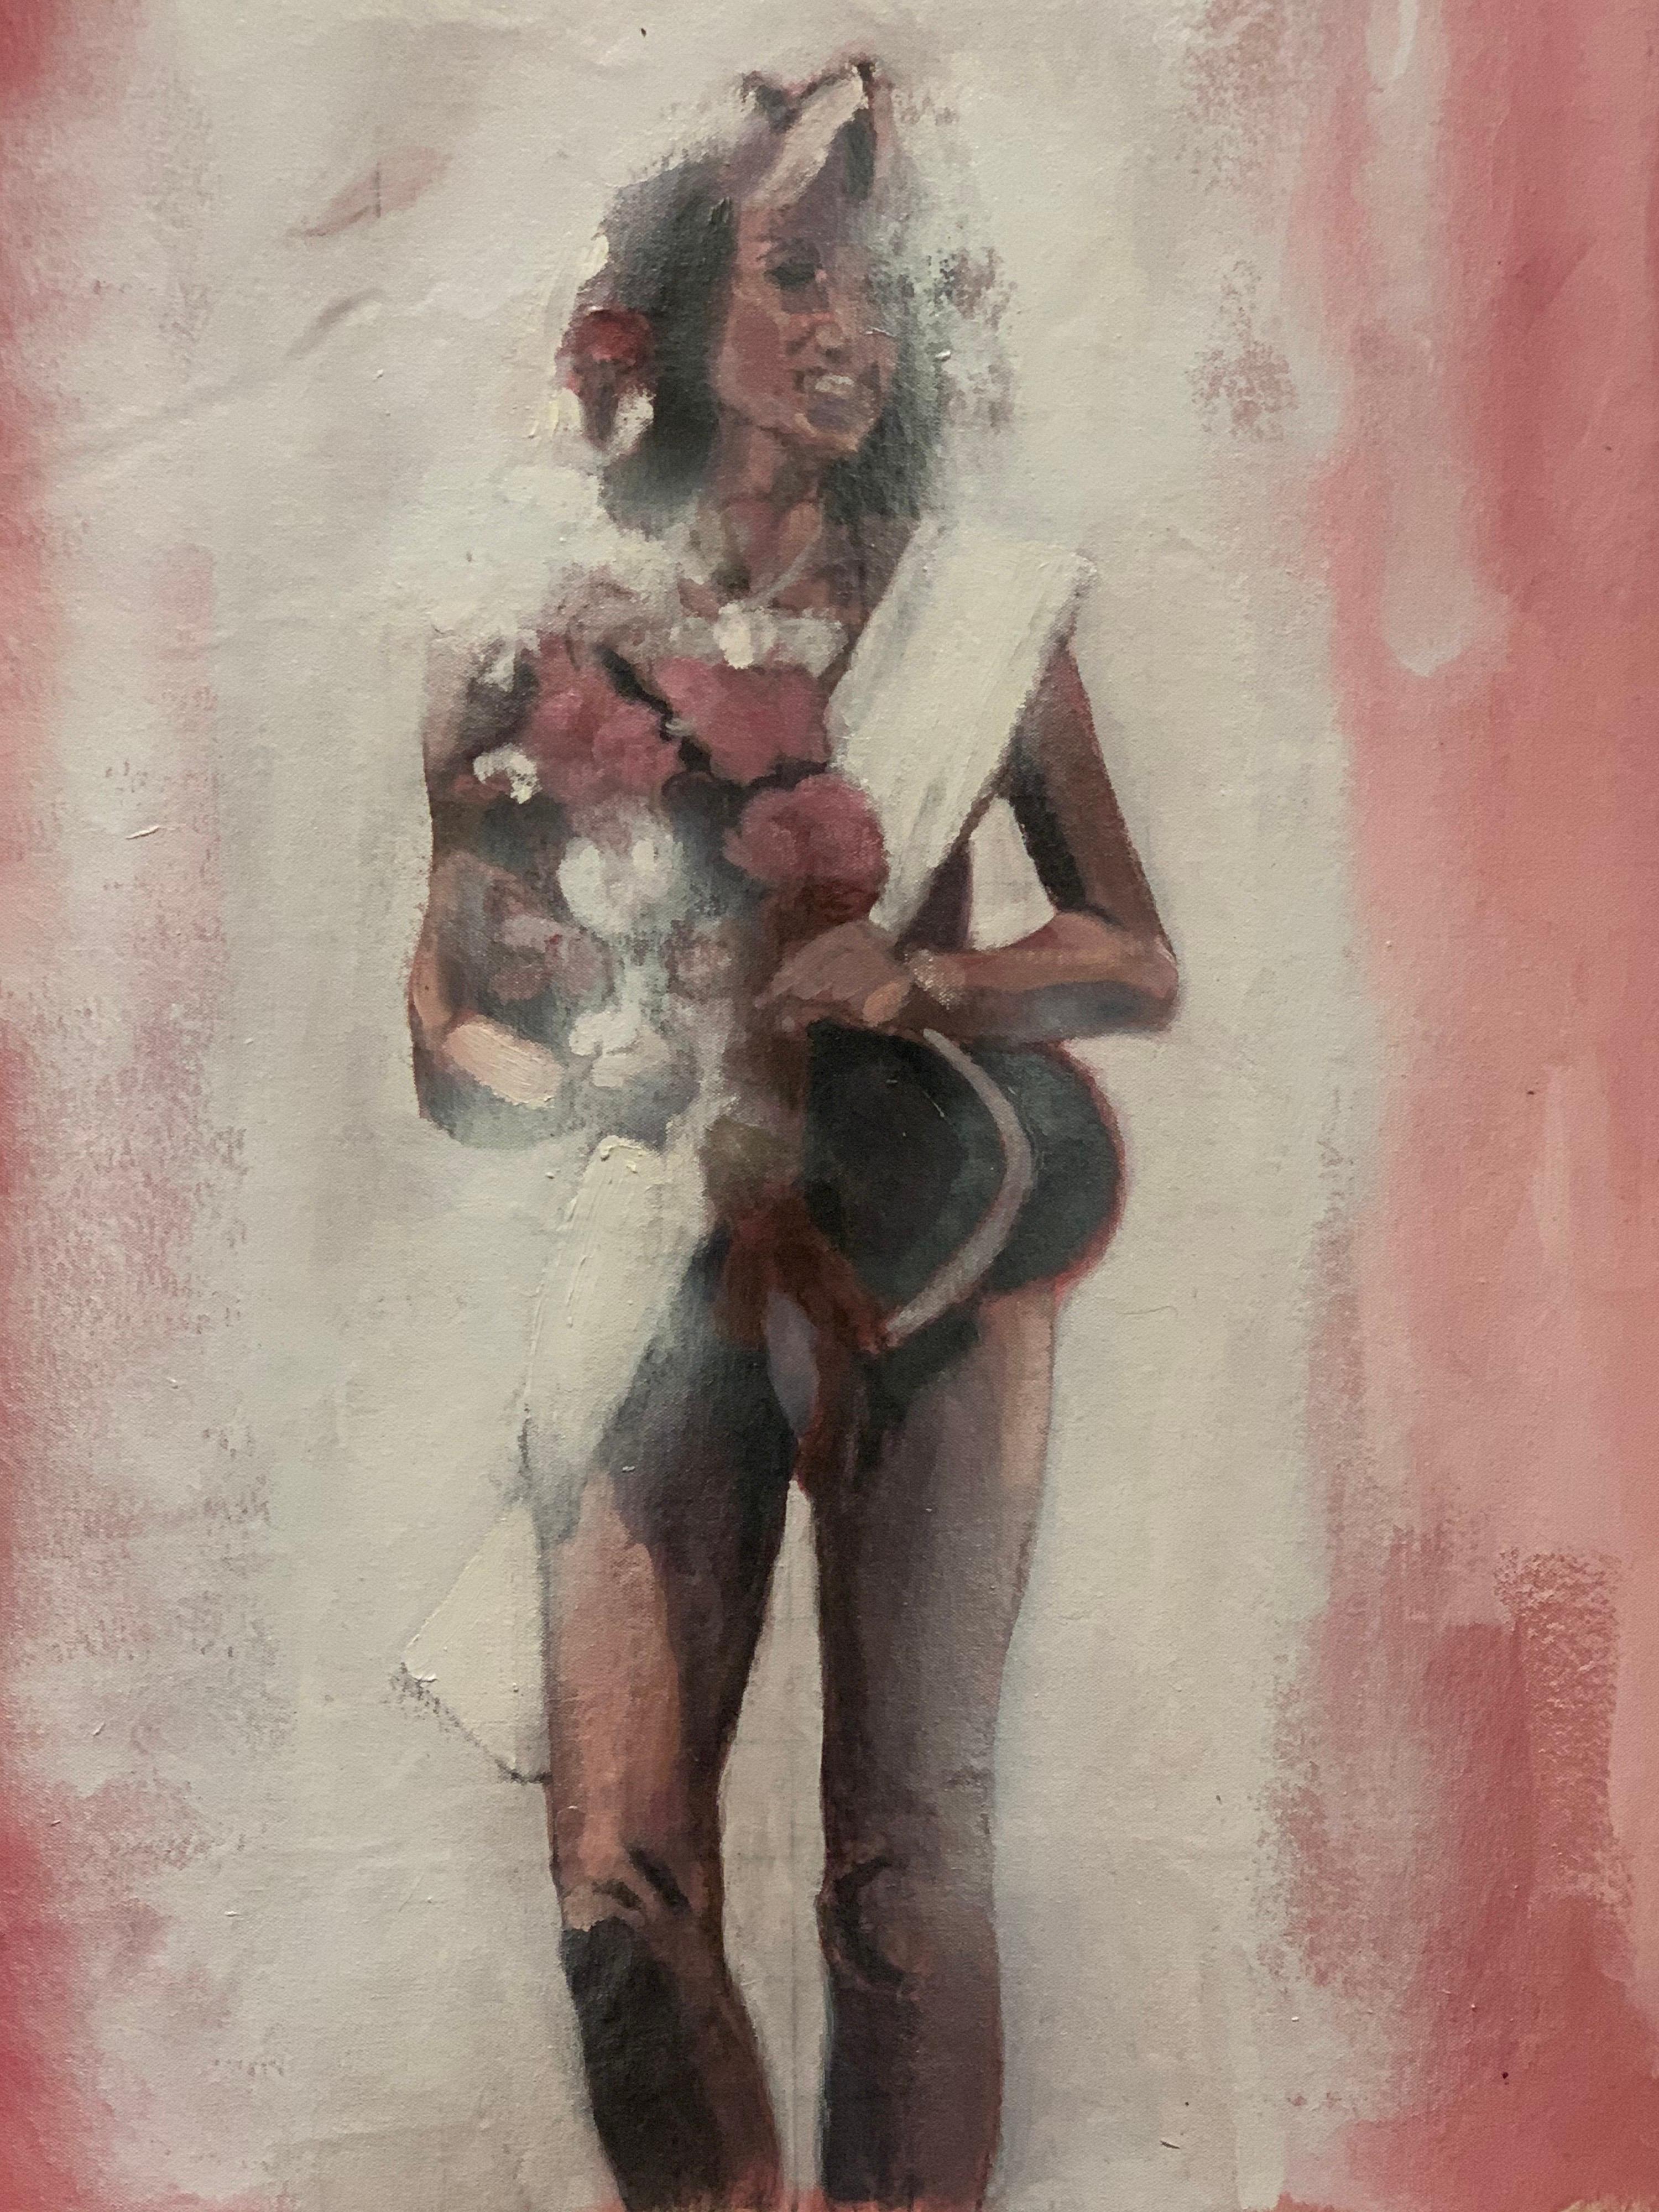 Prize,  Female Figurative, Oil and Aerosol on Canvas, Pink, Off white, Maroon